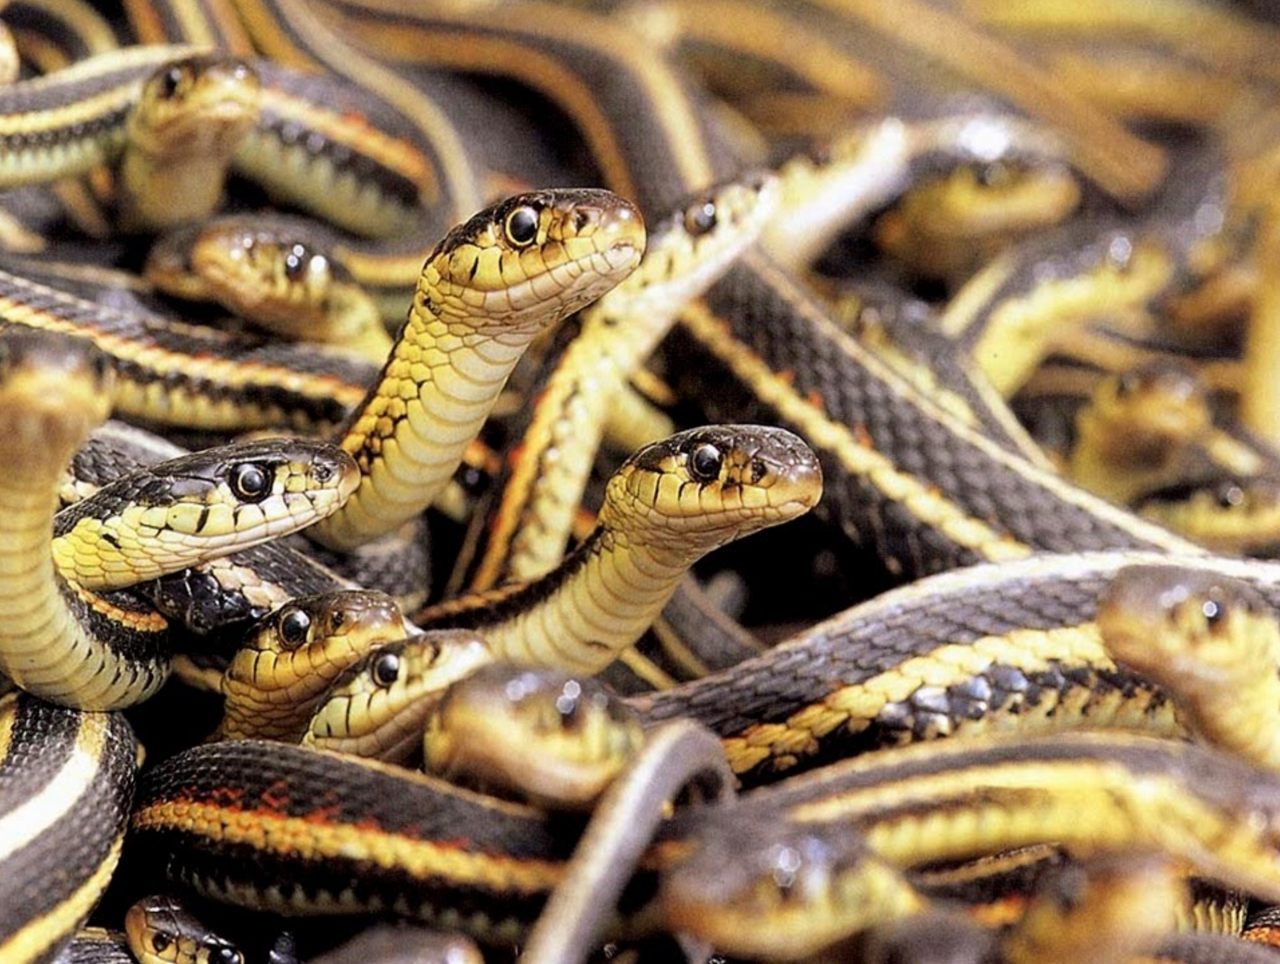 What Can 26,000 Snakes Teach Us About Climate Change?